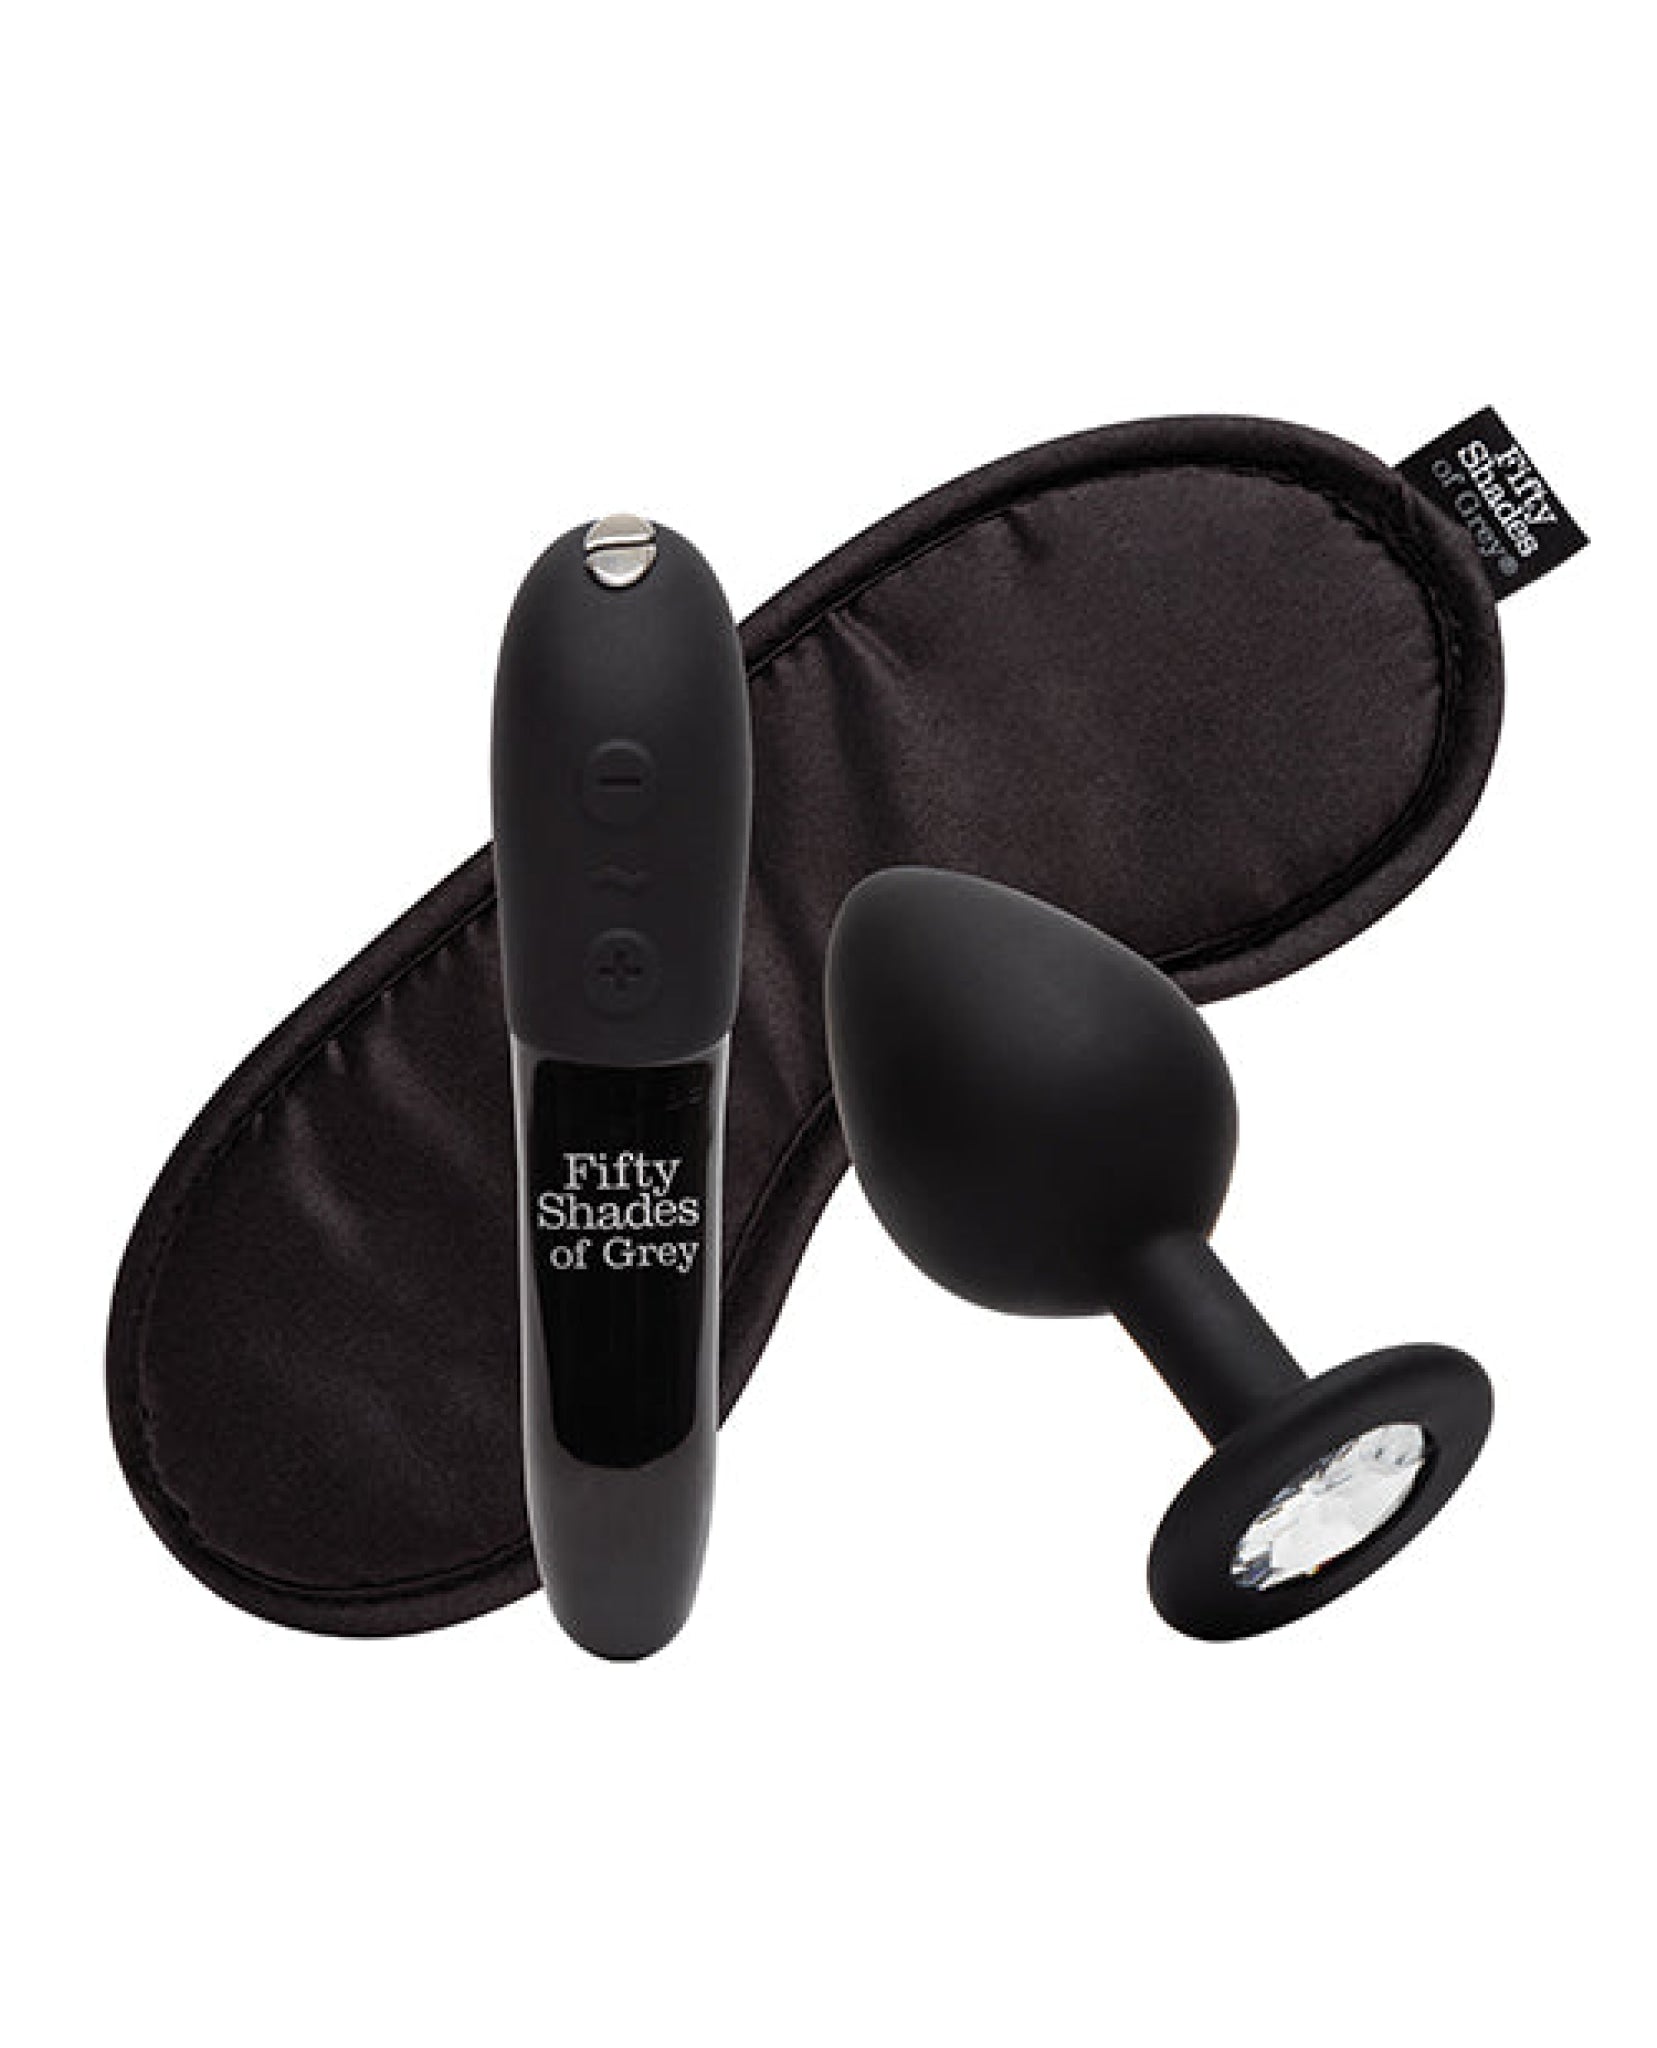 Fifty Shades Of Grey & We-vibe Come To Bed Kit Lovehoney C/o Wow Tech